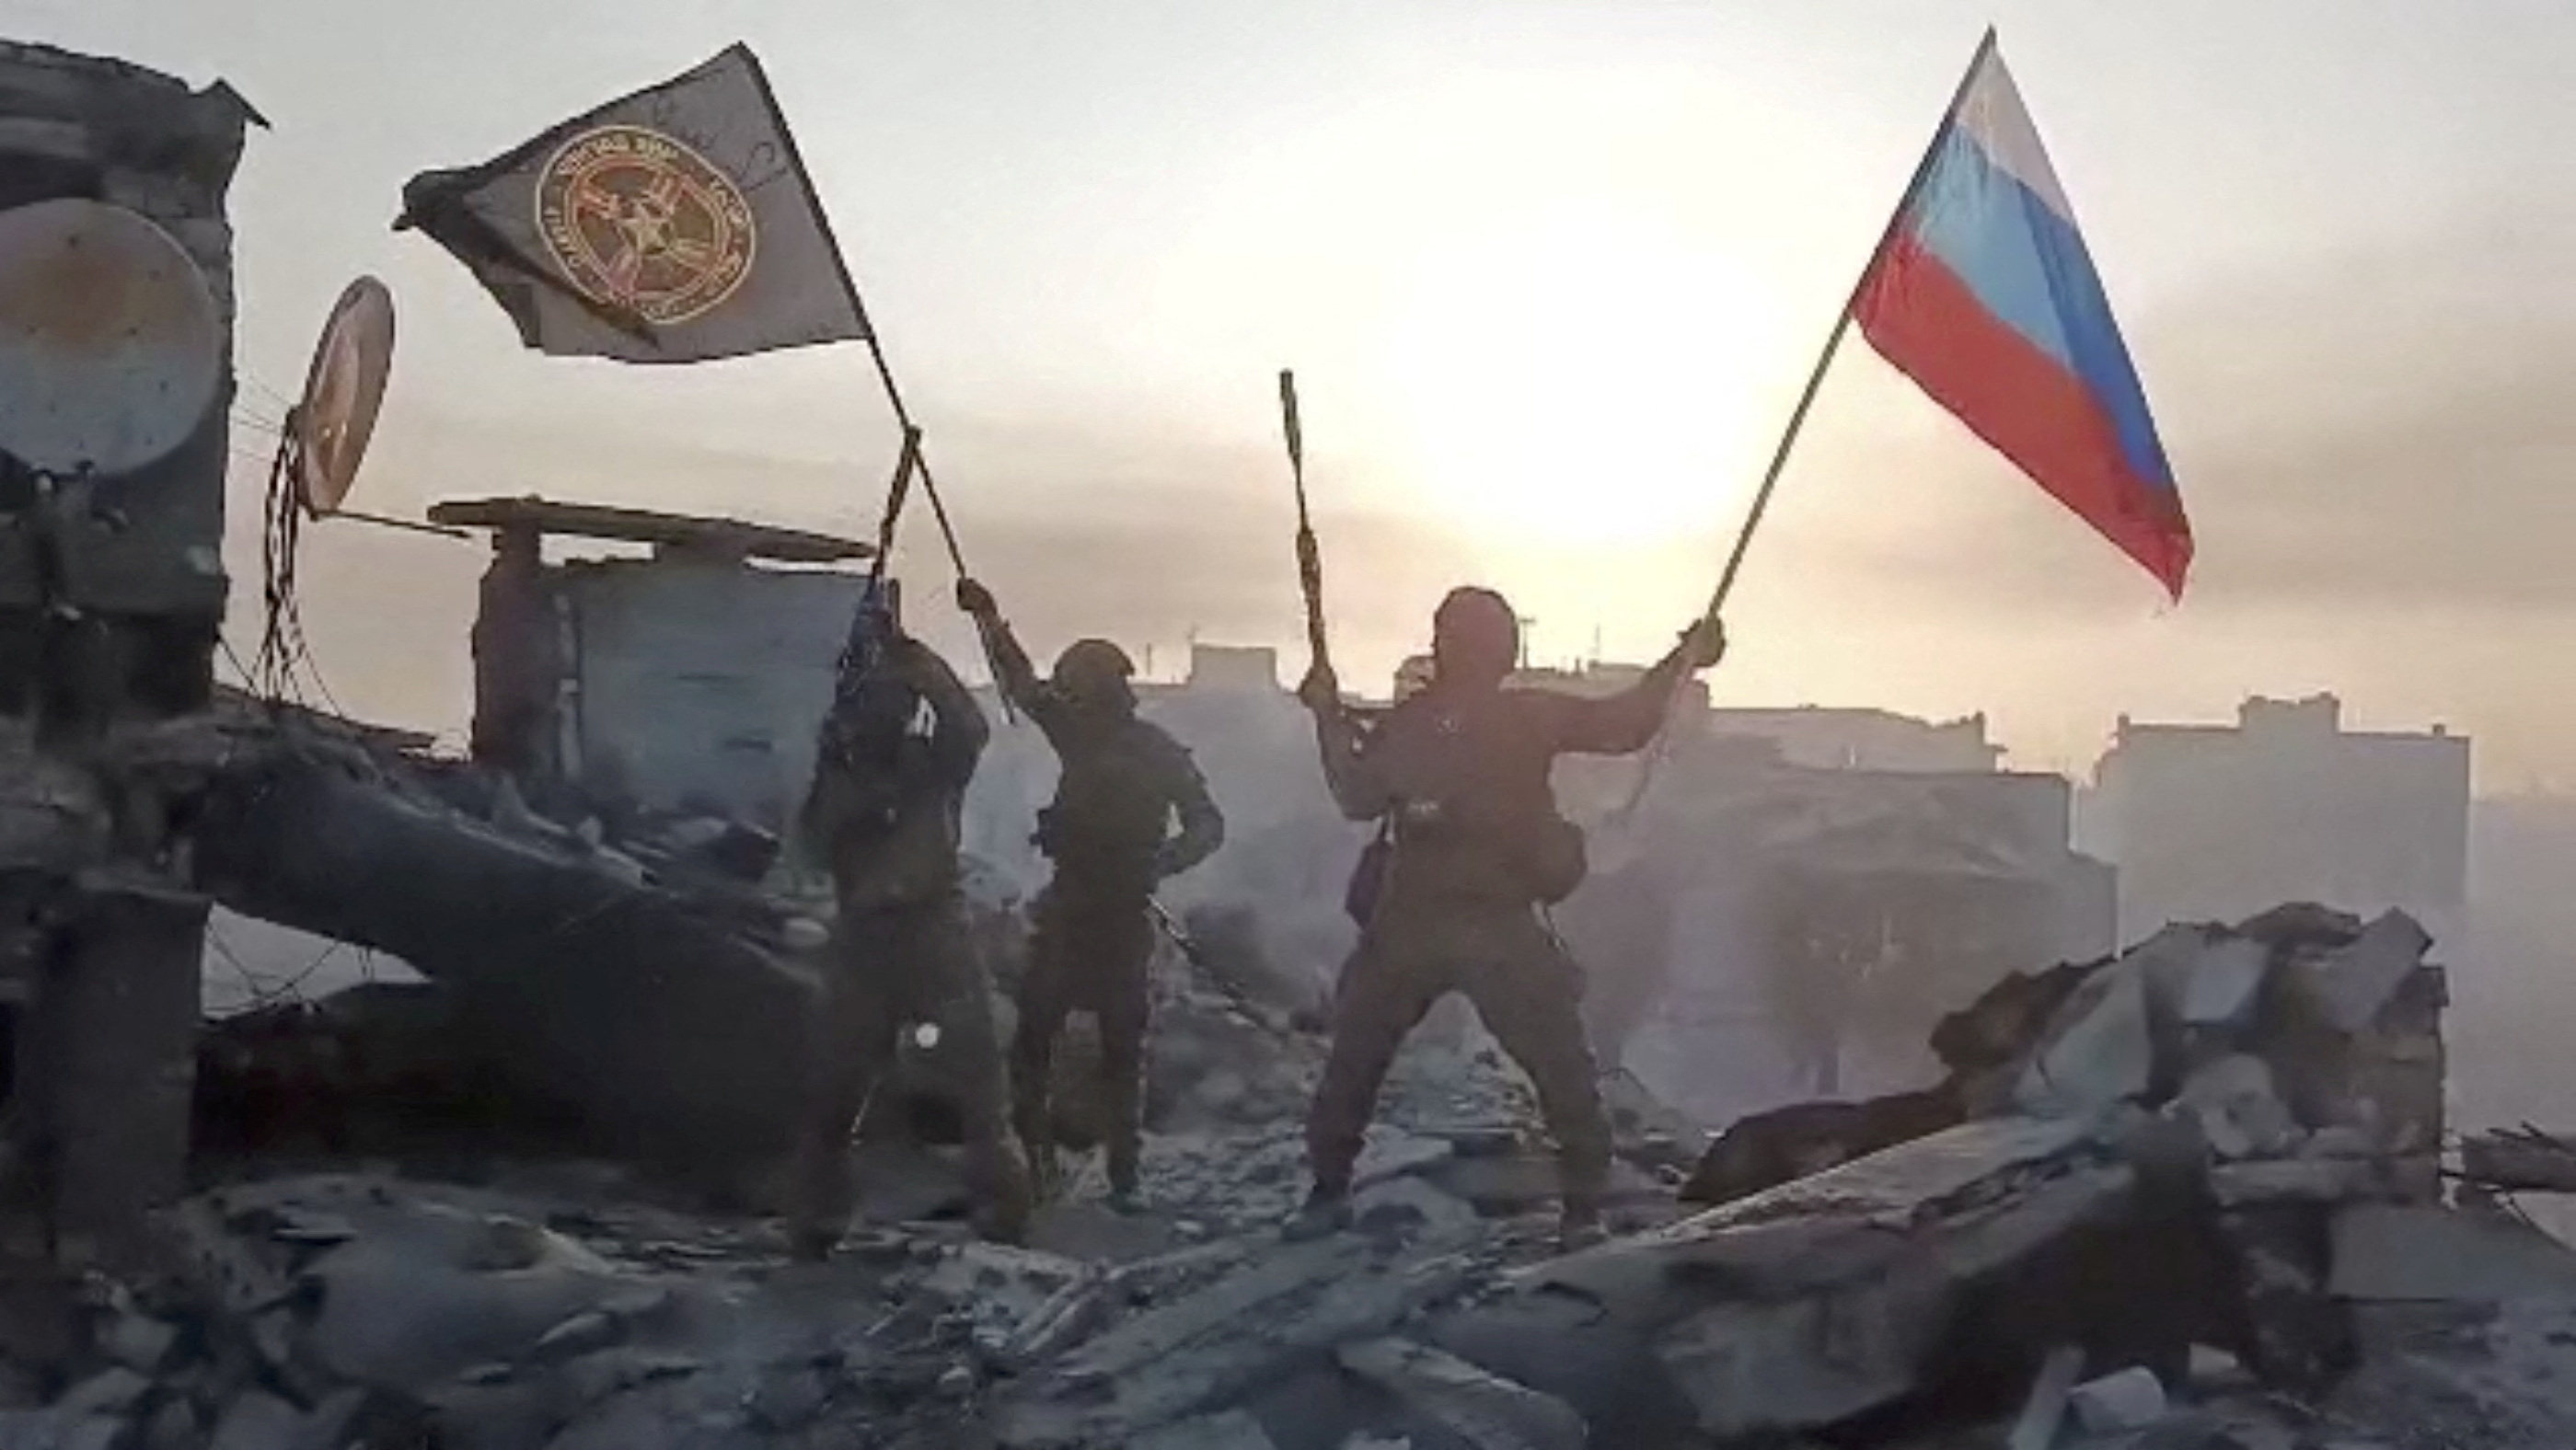 Wagner mercenary group fighters during the Russia-Ukraine conflict. Reuters / handout